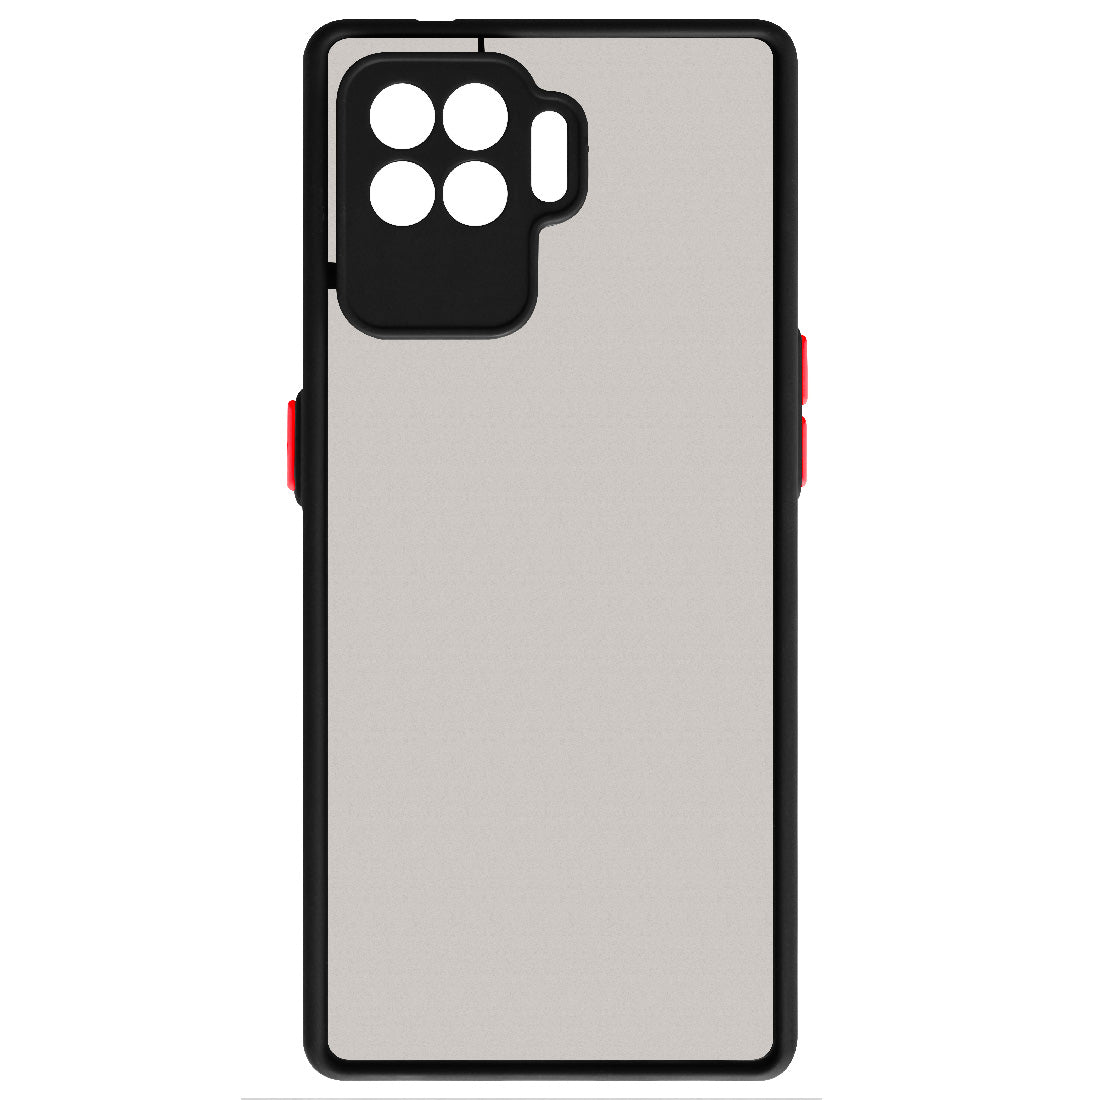 Smoke Back Case Cover for Oppo F19 Pro